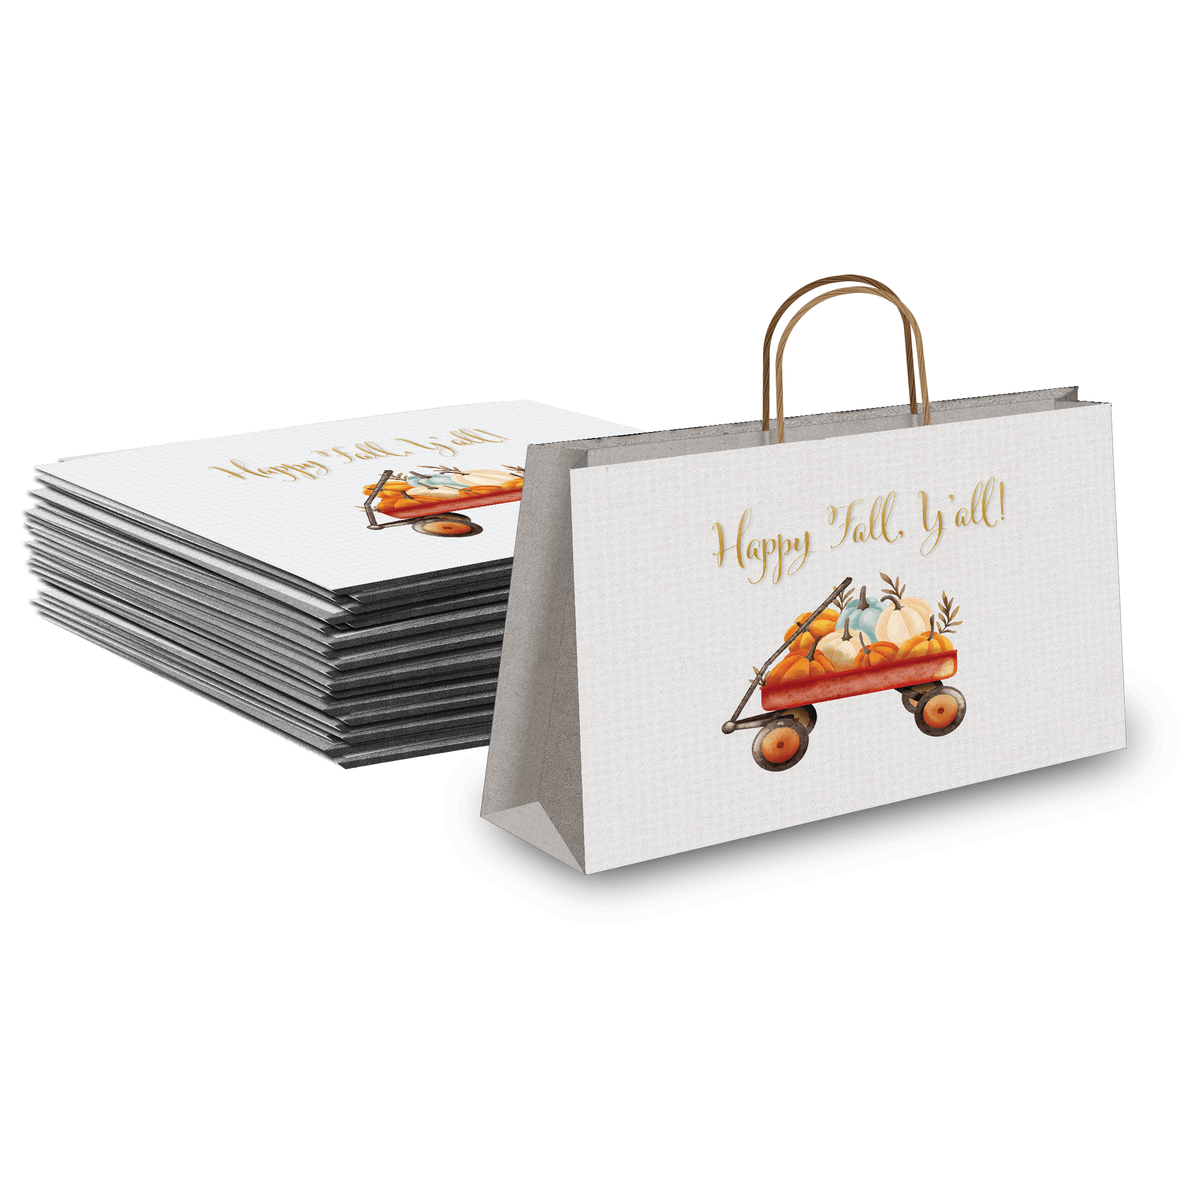 Hello Fall Large Birthday Gift Bags Vogue Kraft Shopping Bags with Handles